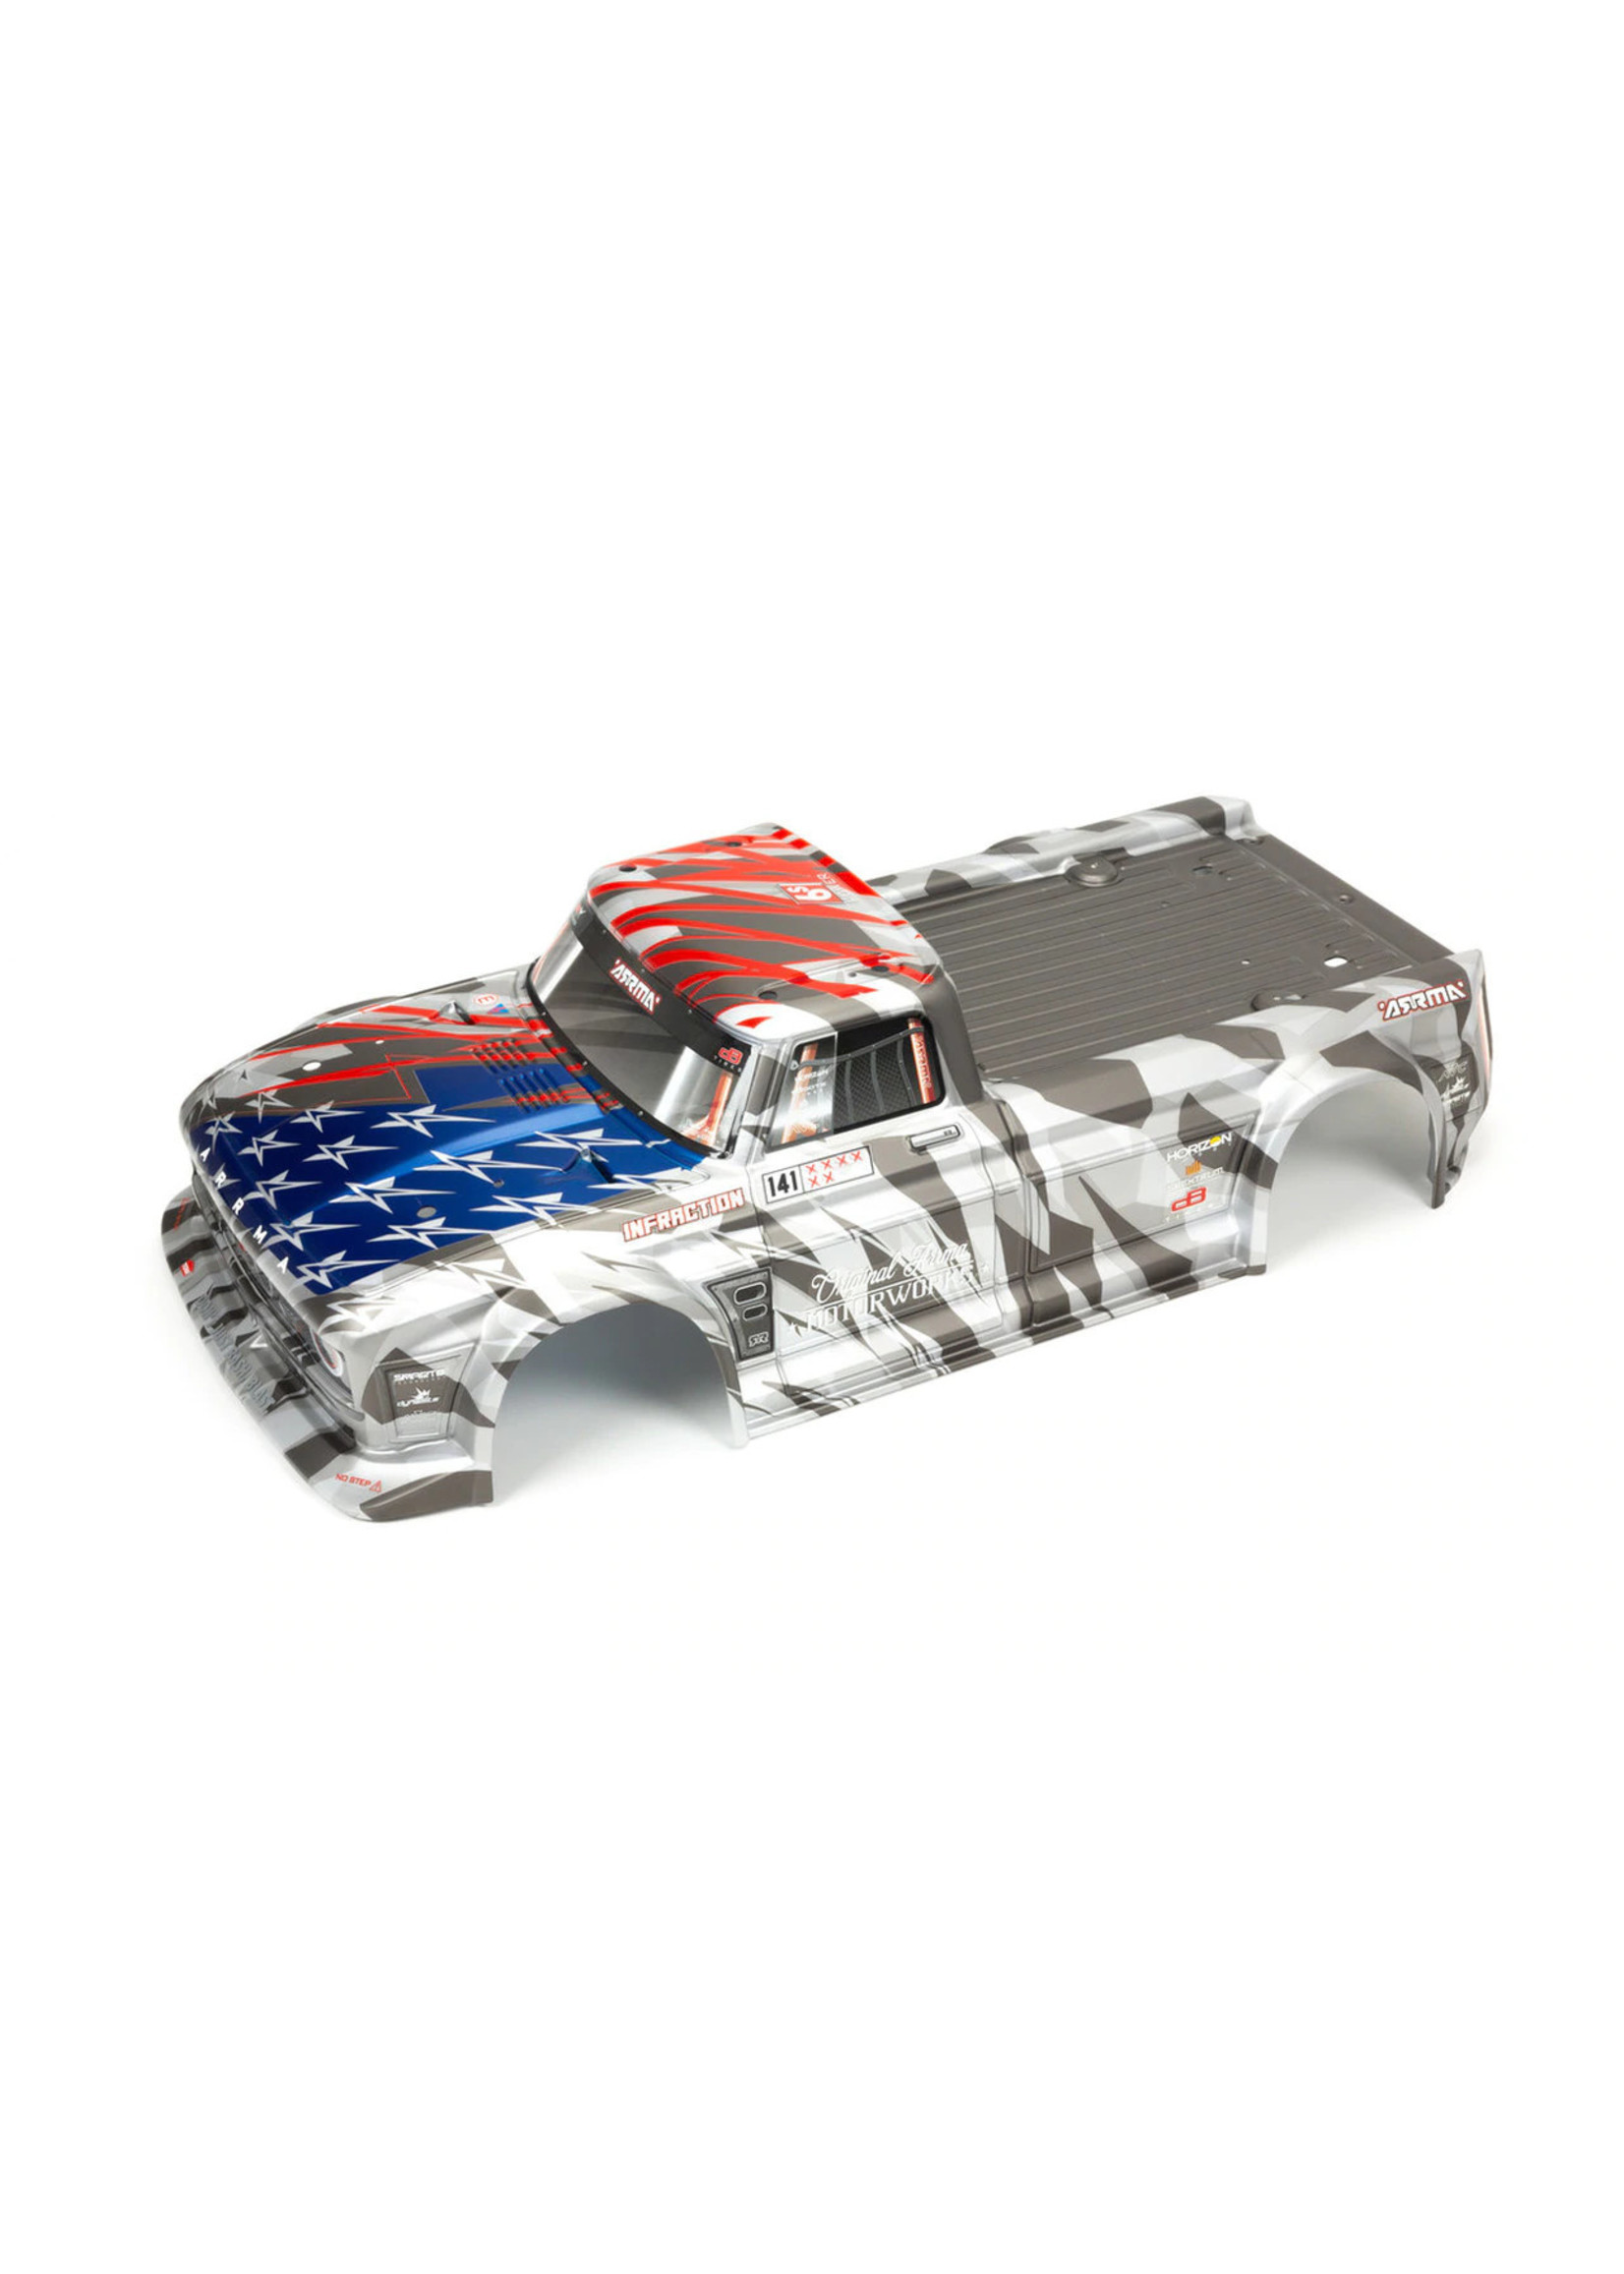 Arrma ARA410006 - Infraction 6S BLX Painted Body - Silver/Red